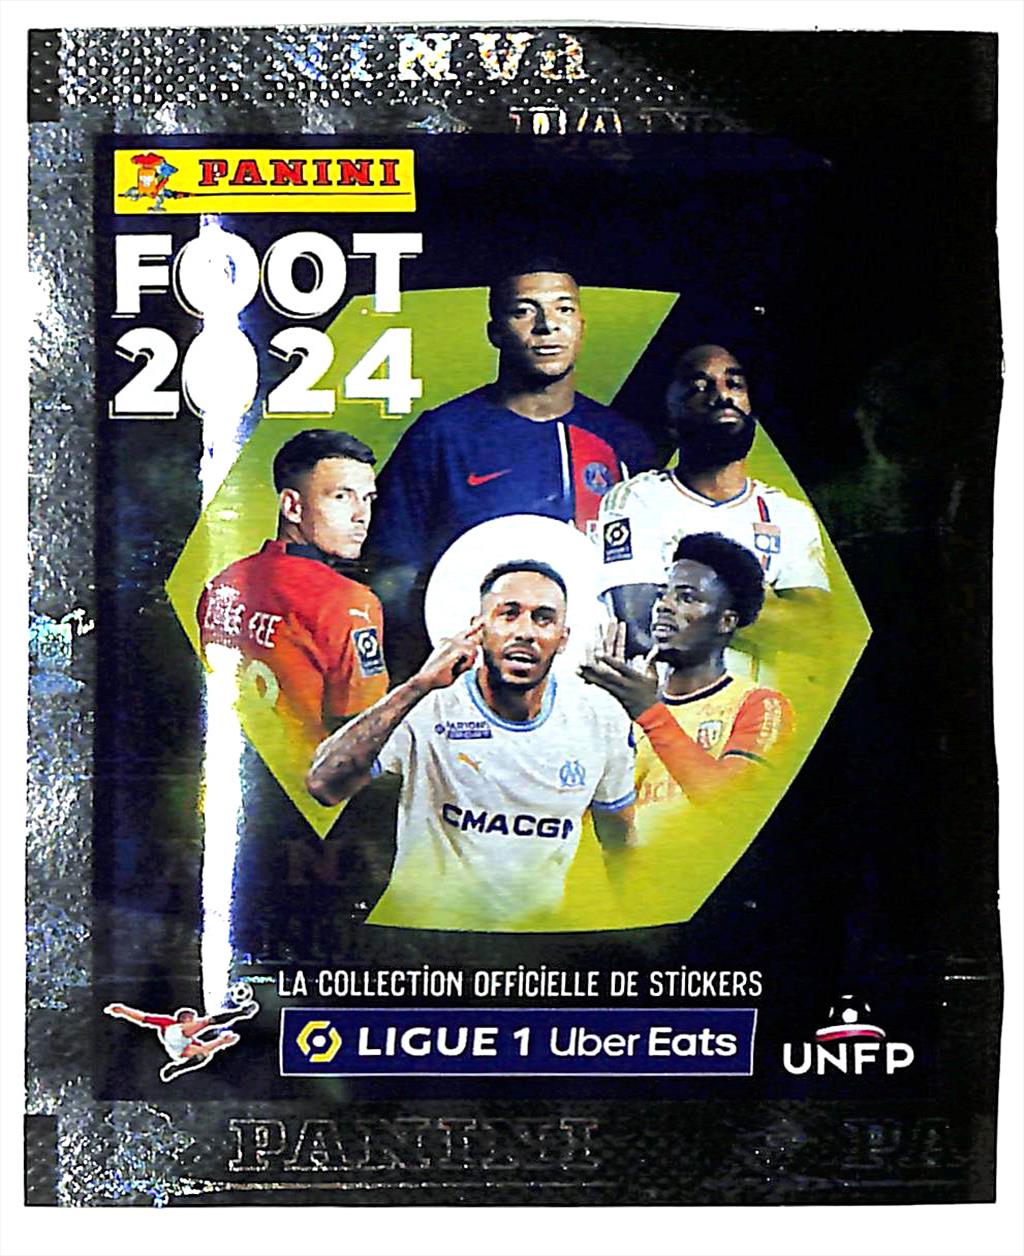 PANINI « FOOT 2024 LIGUE 1 UBER EATS STICKERS » : fiche